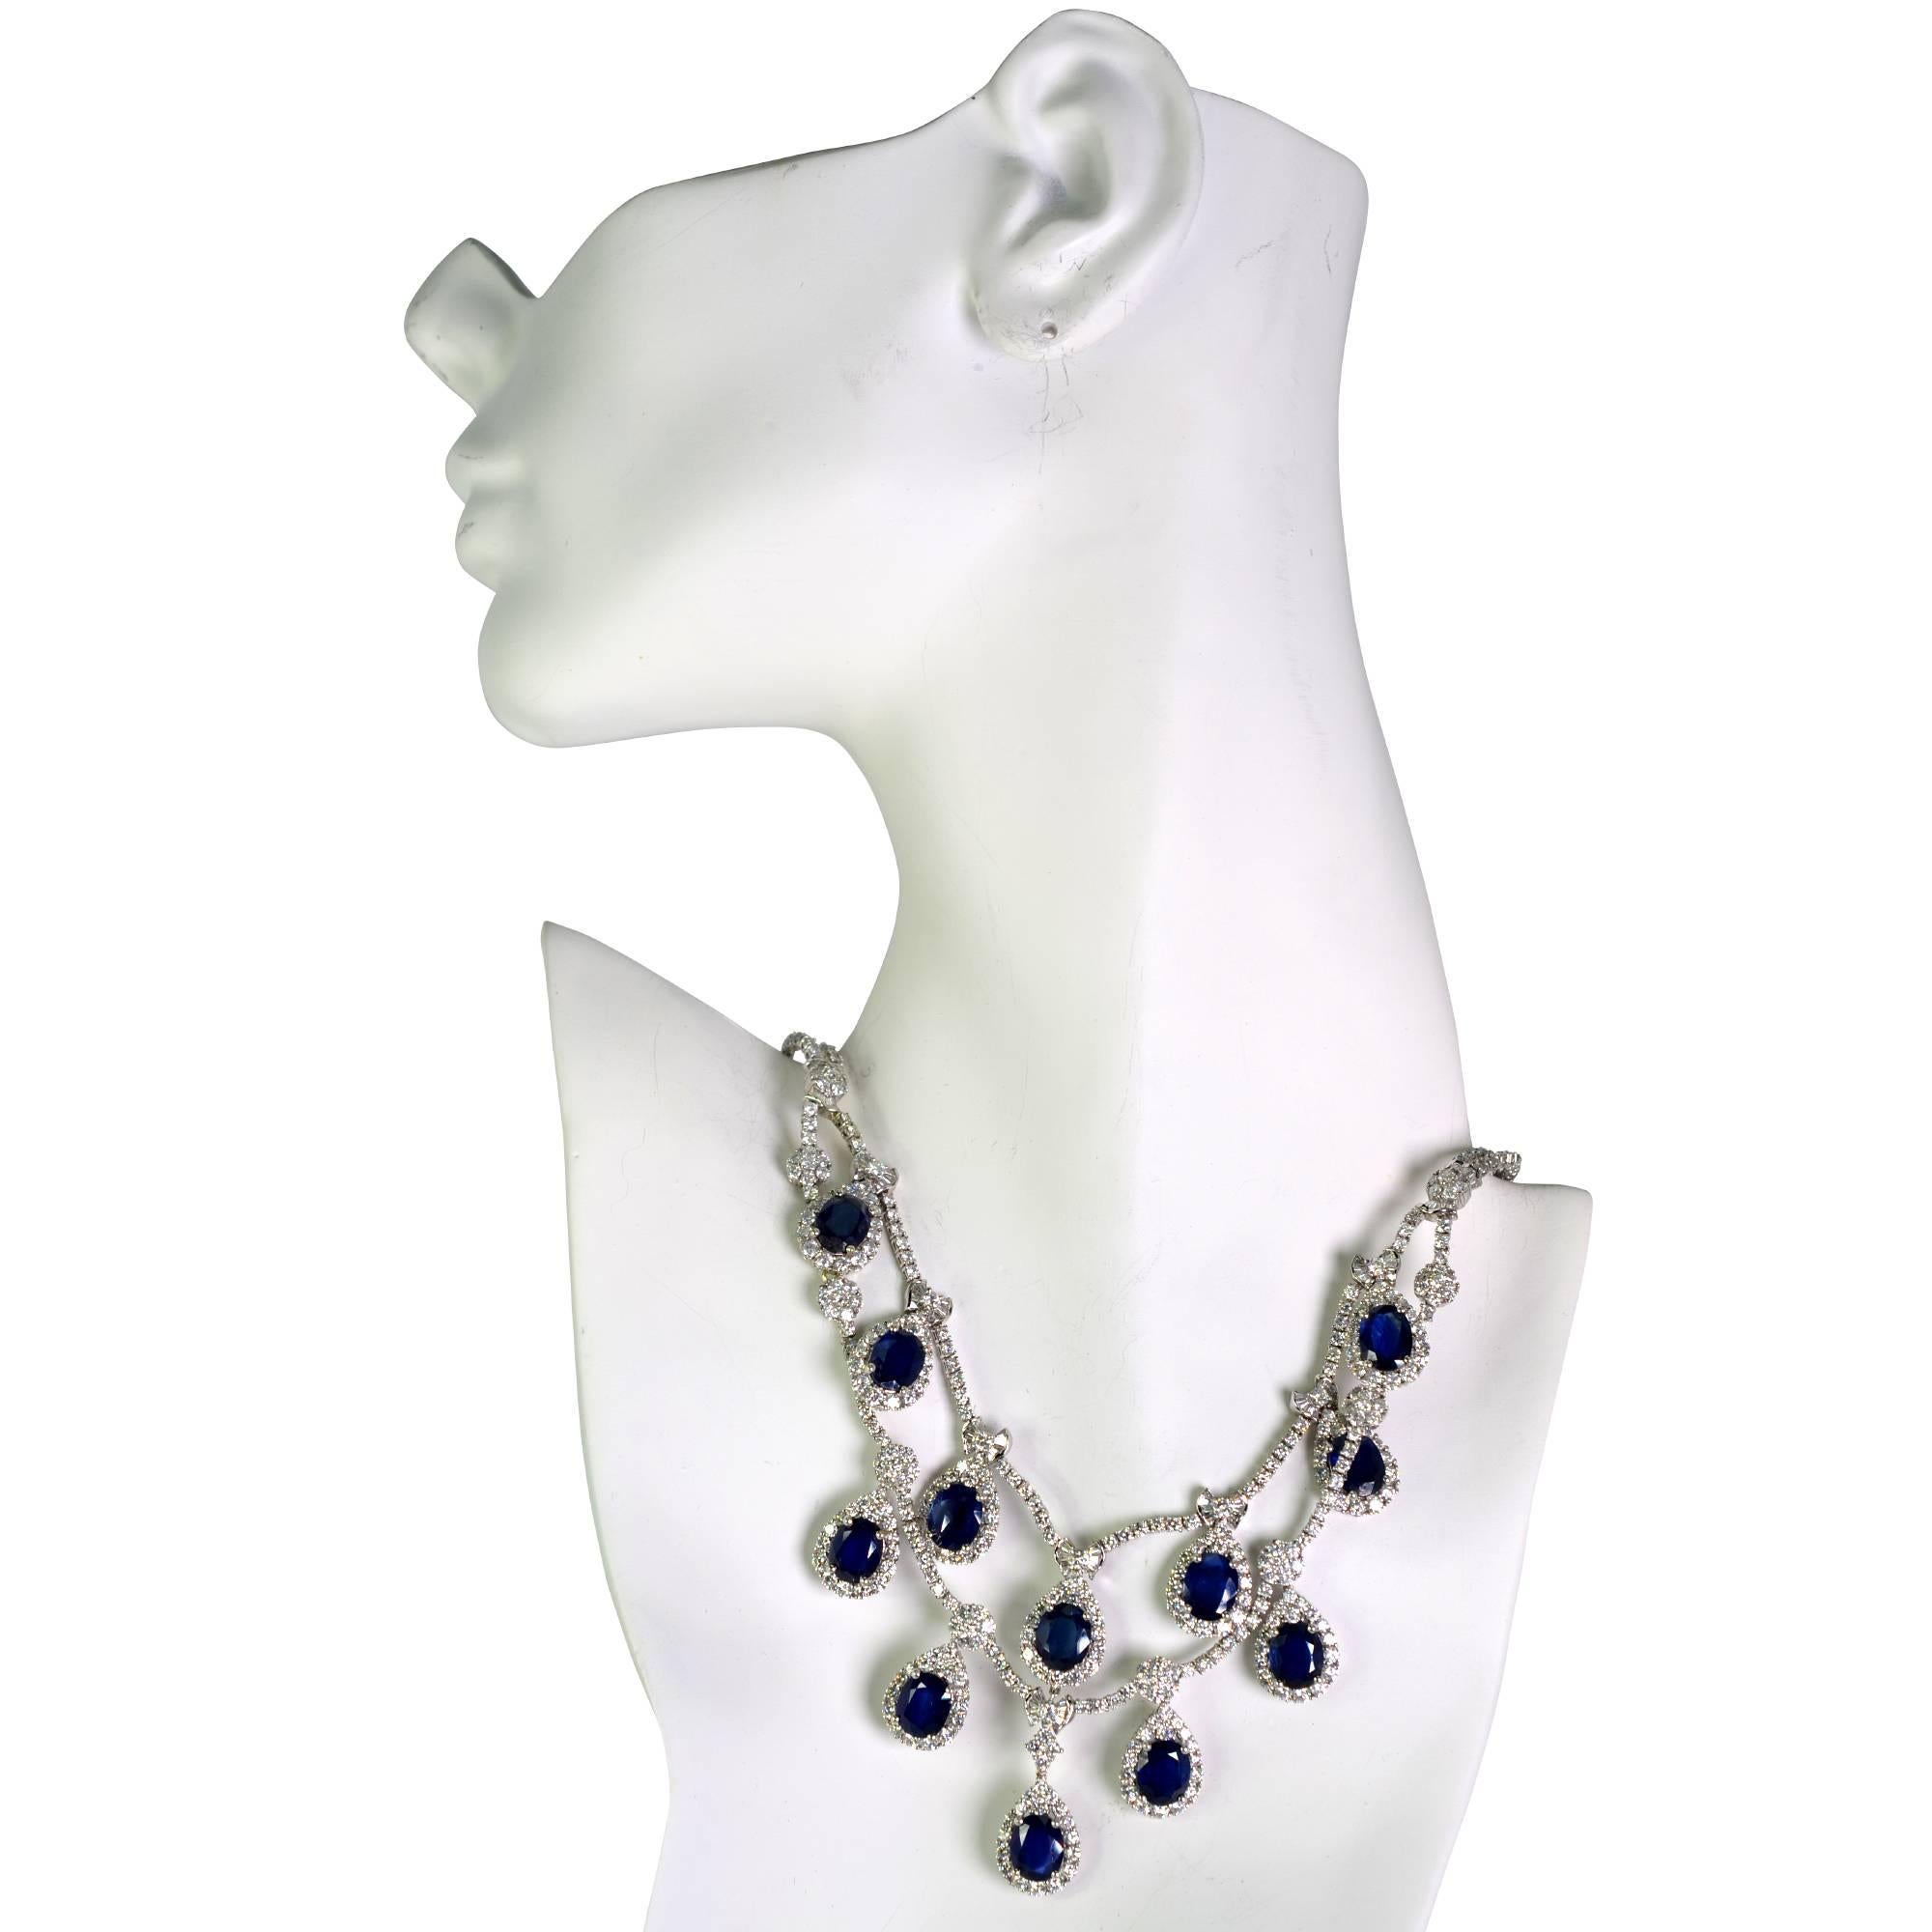 Modern Impressive Sapphire and Diamond Necklace and earrings